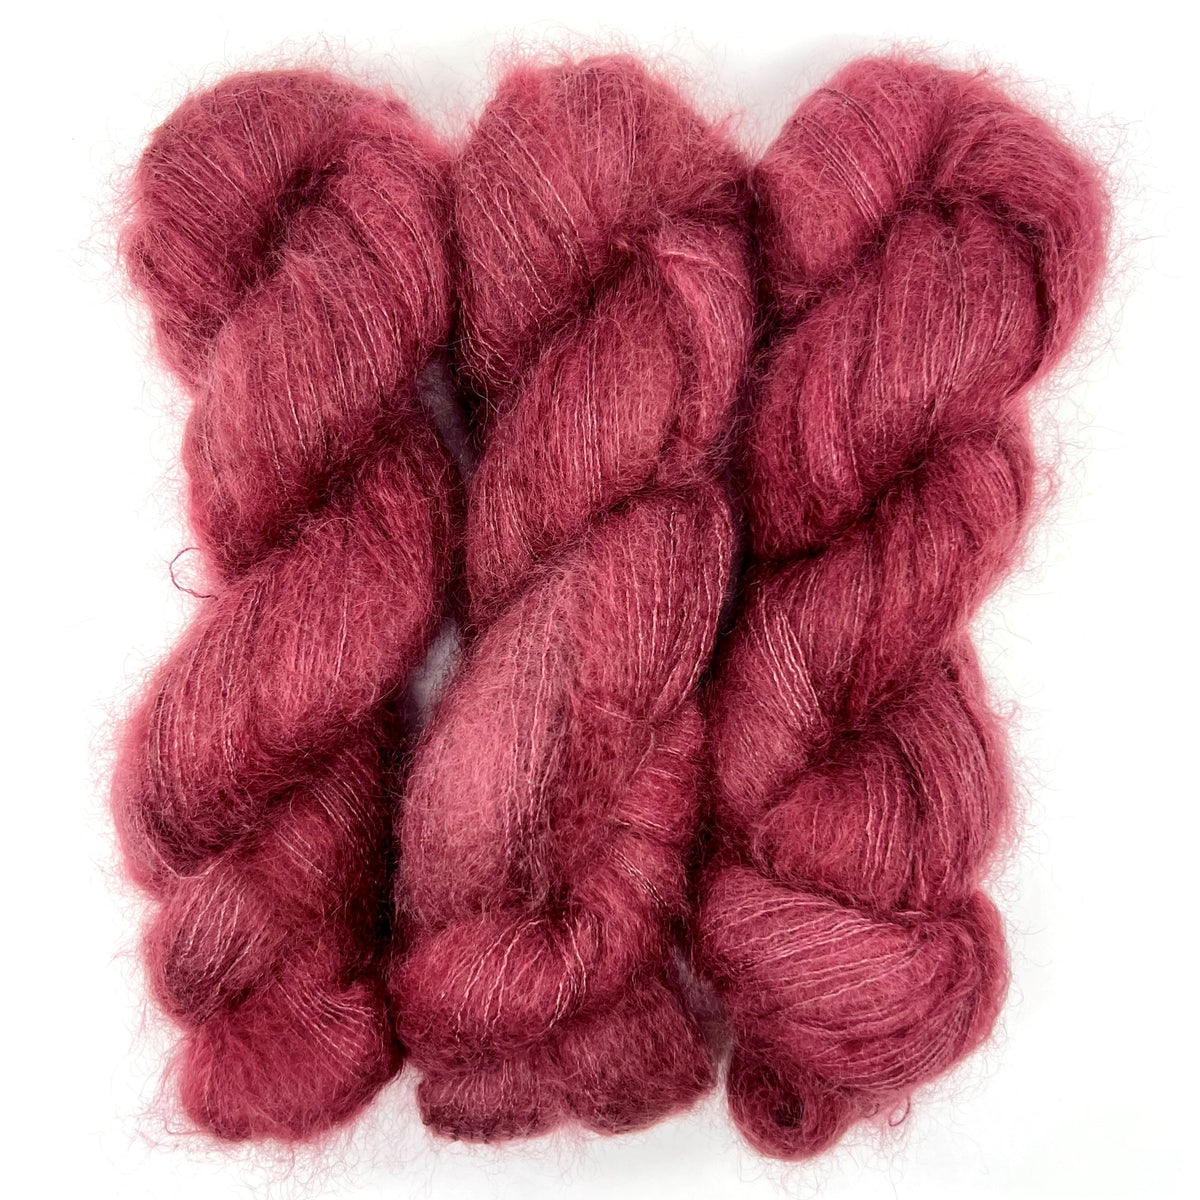 French Bordeaux - Delicacy Lace - Dyed Stock